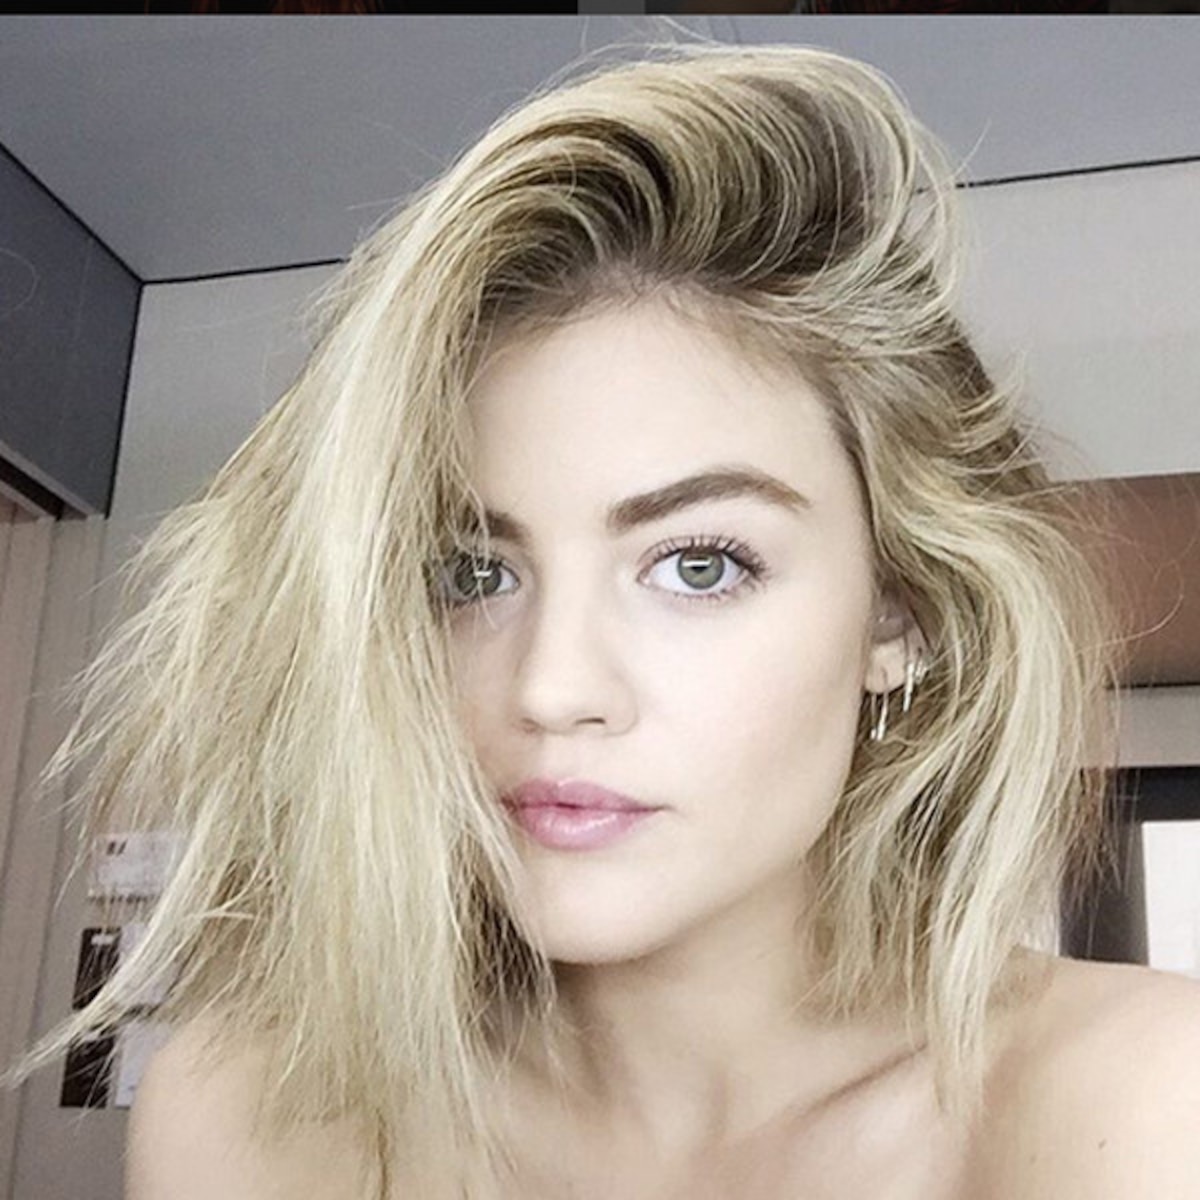 lucy hale toppless photos